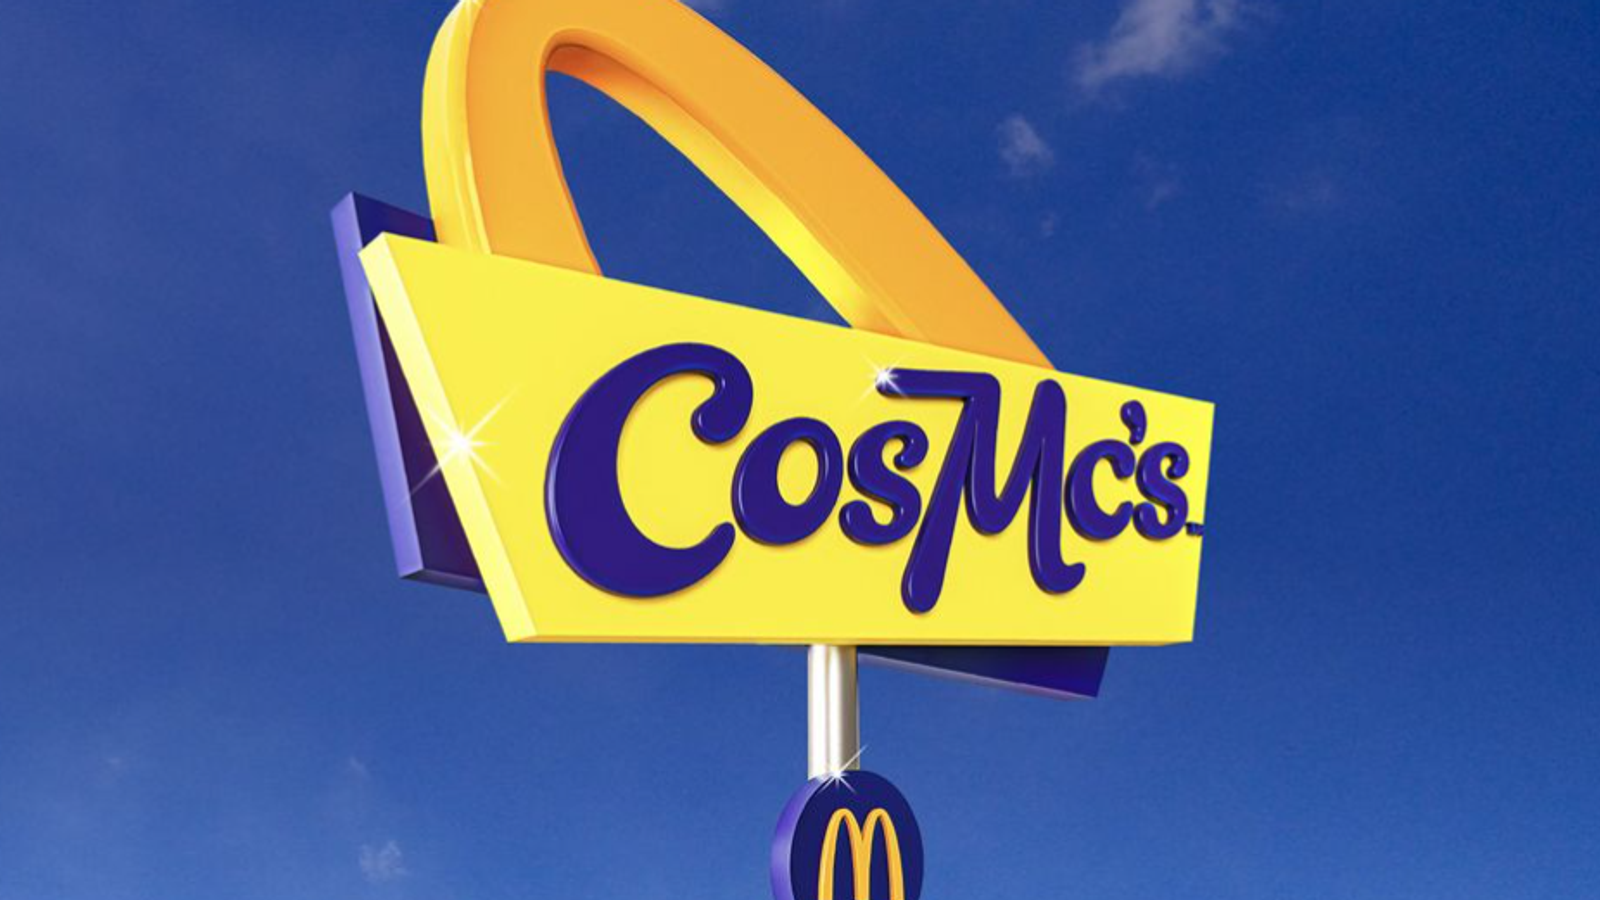 McDonald’s to launch new CosMc’s chain in bid to compete with Starbucks | Business News